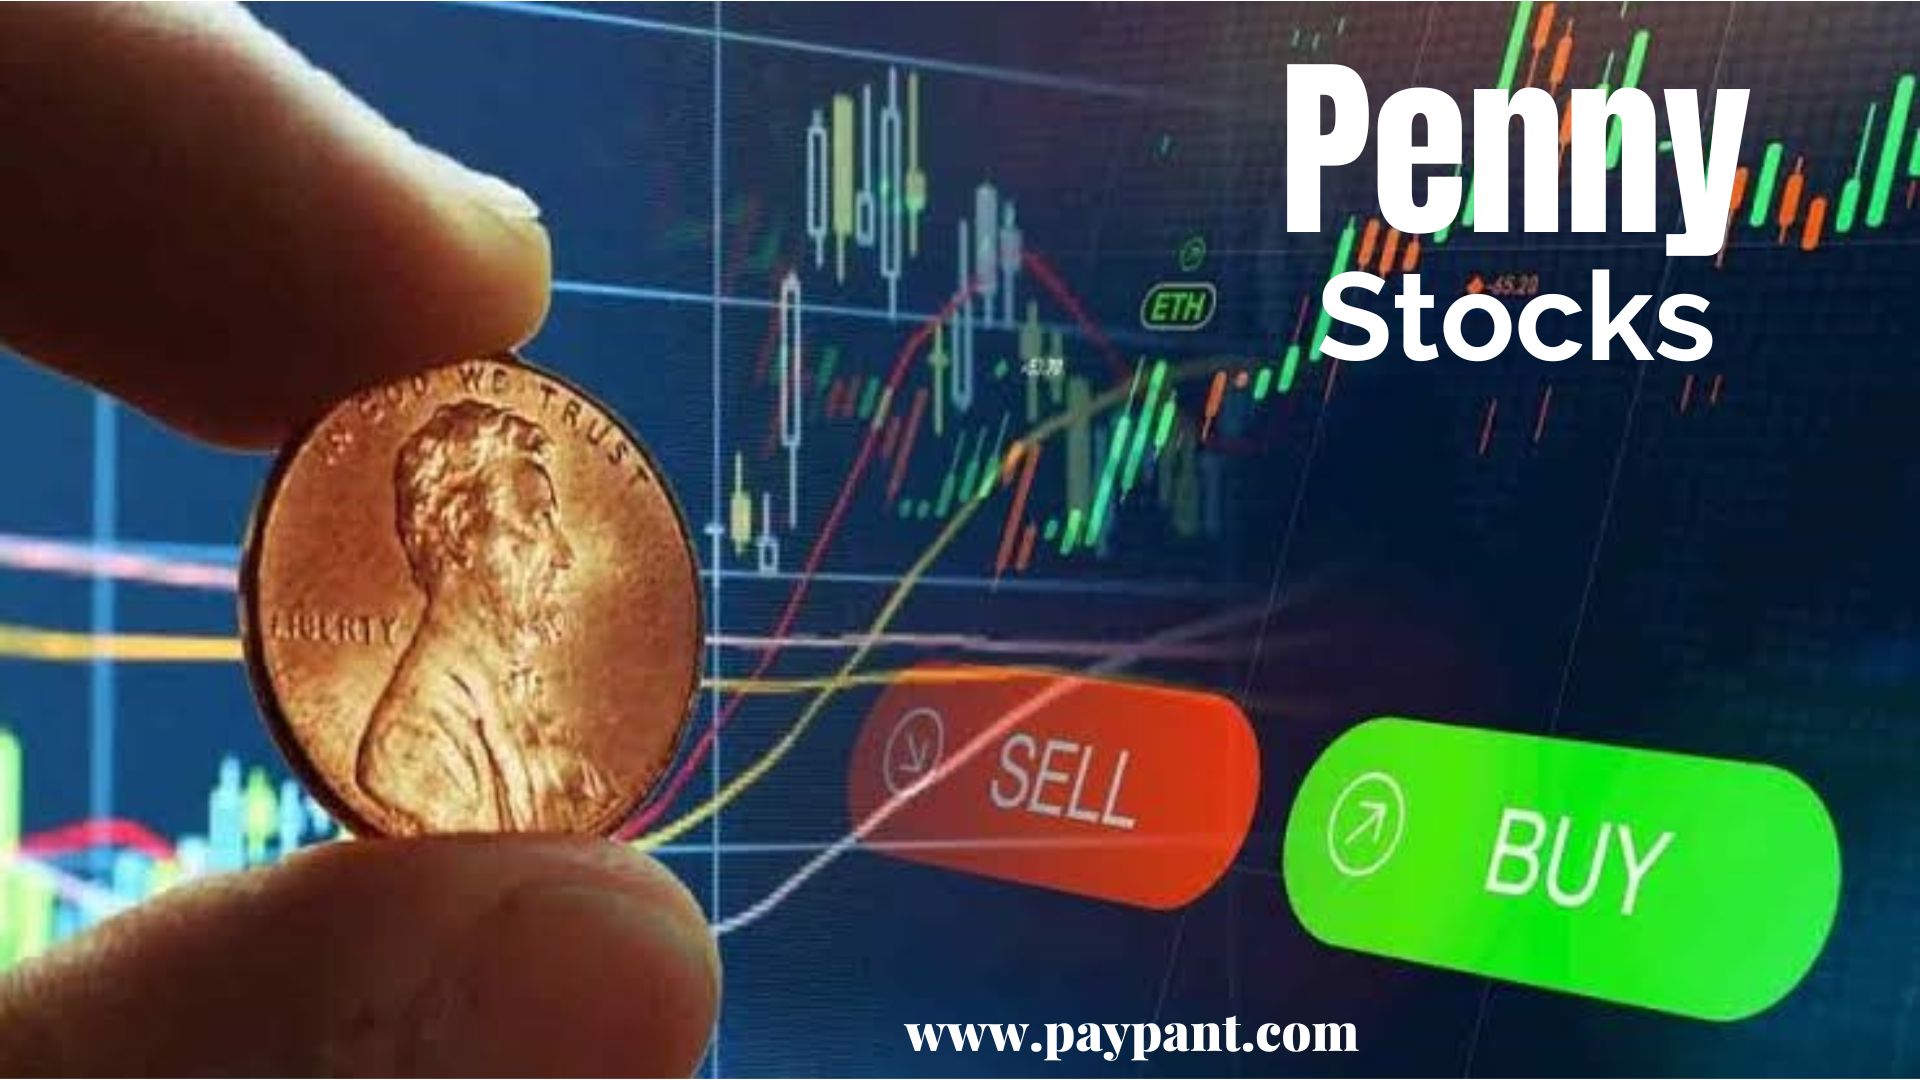 10 Things to Know Before Investing in Penny Stocks